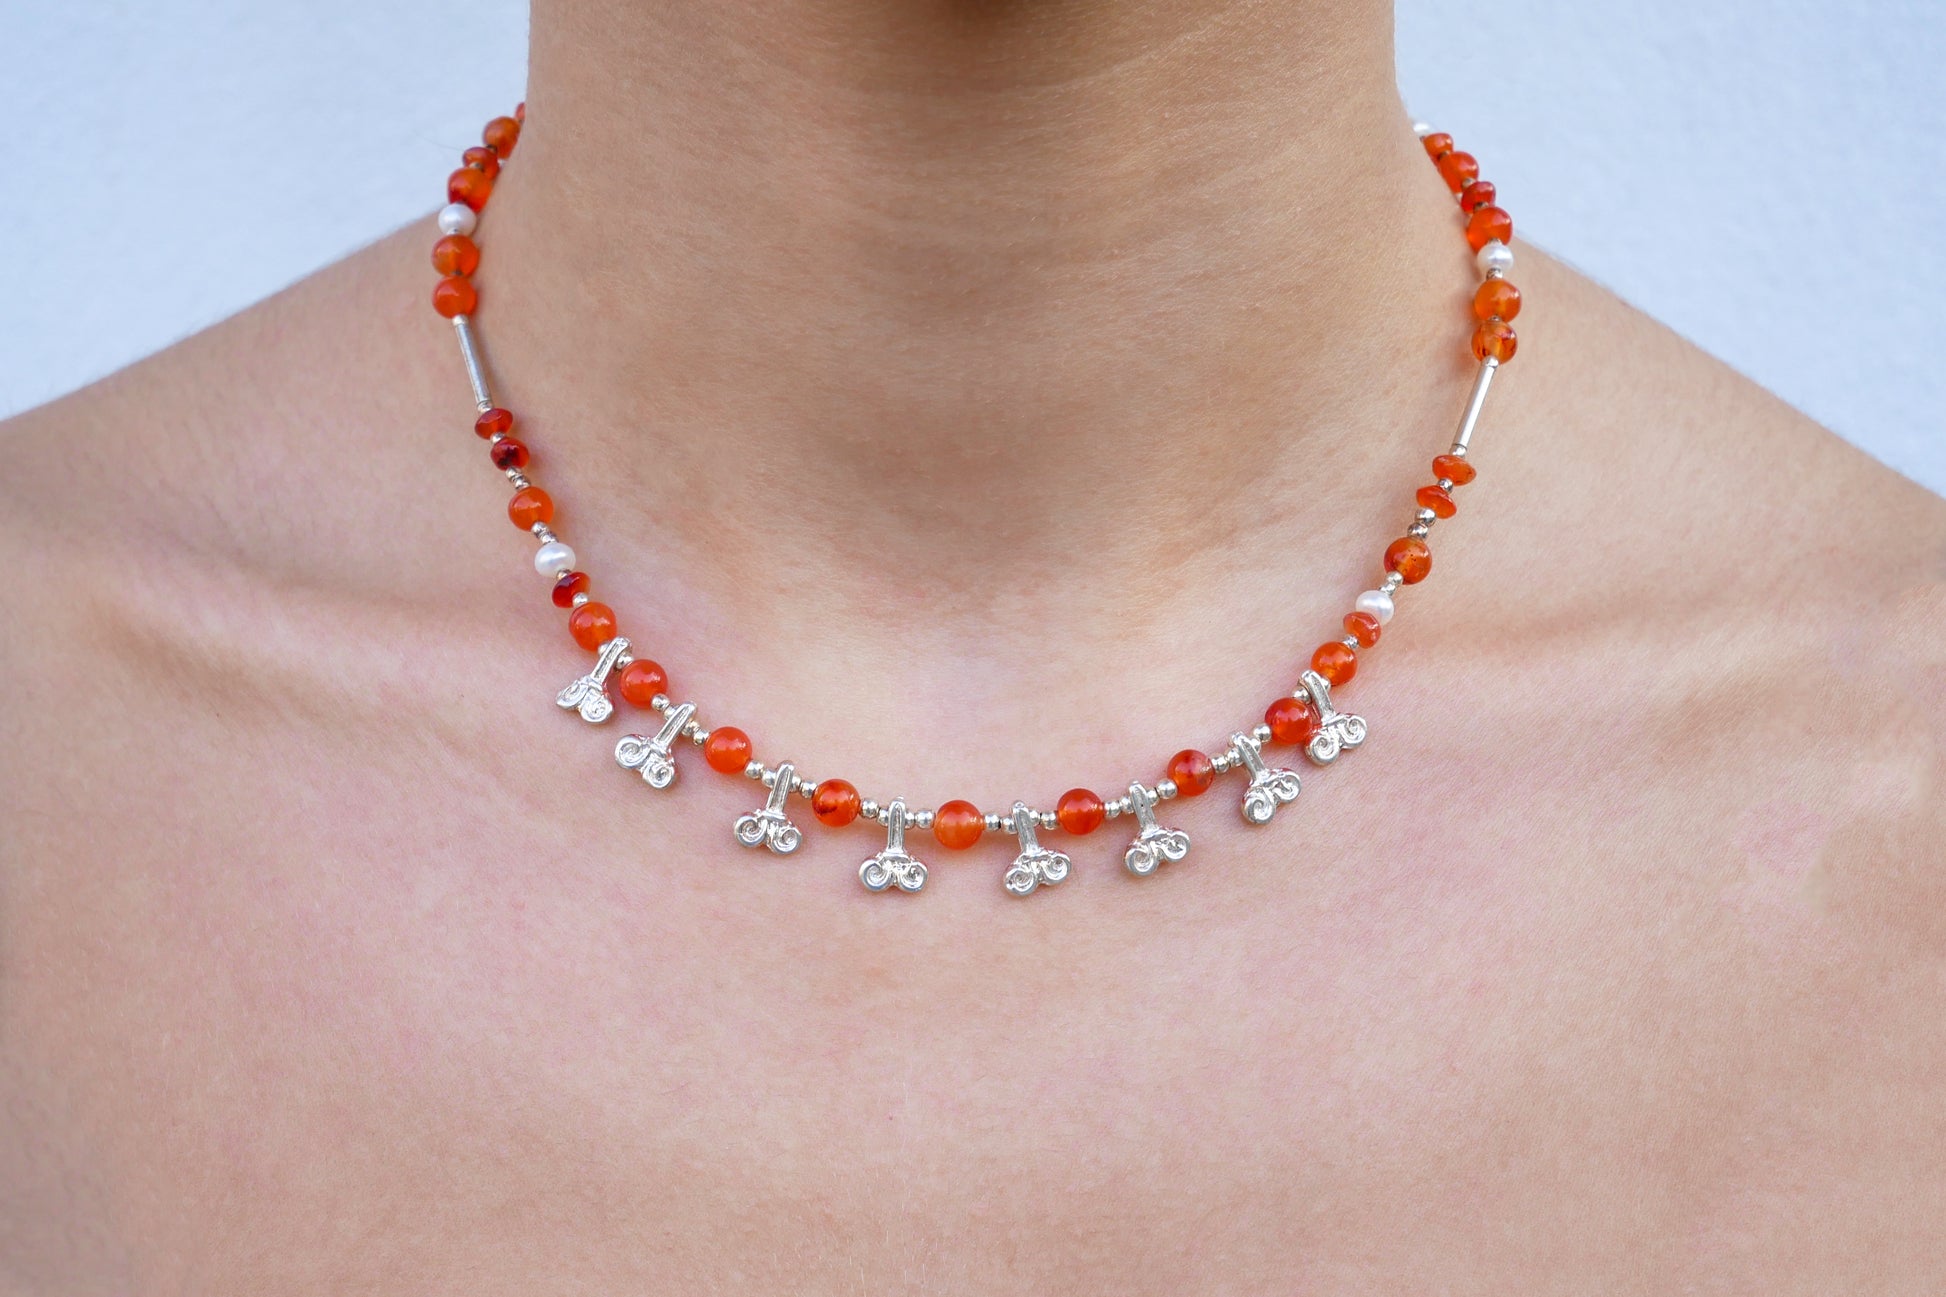 Carnelians, Pearls, and Silver Lilies Necklace 